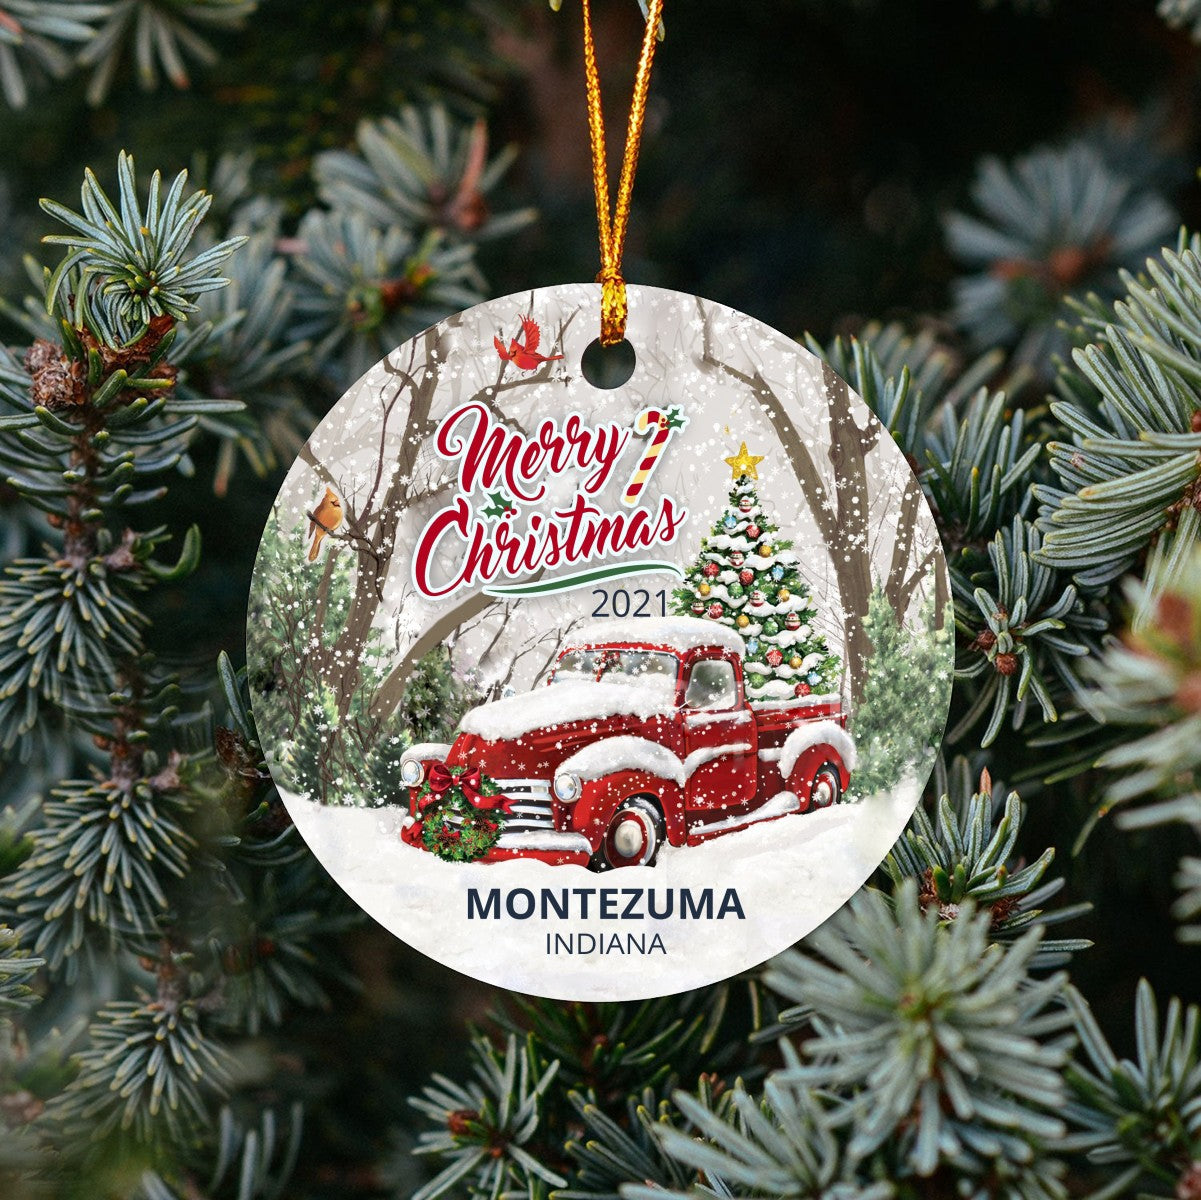 Christmas Tree Ornaments Montezuma - Ornament With Name City, State Montezuma Indiana IN Ornament - Red Truck Xmas Ornaments 3'' Plastic Gift For Family, Friend And Housewarming